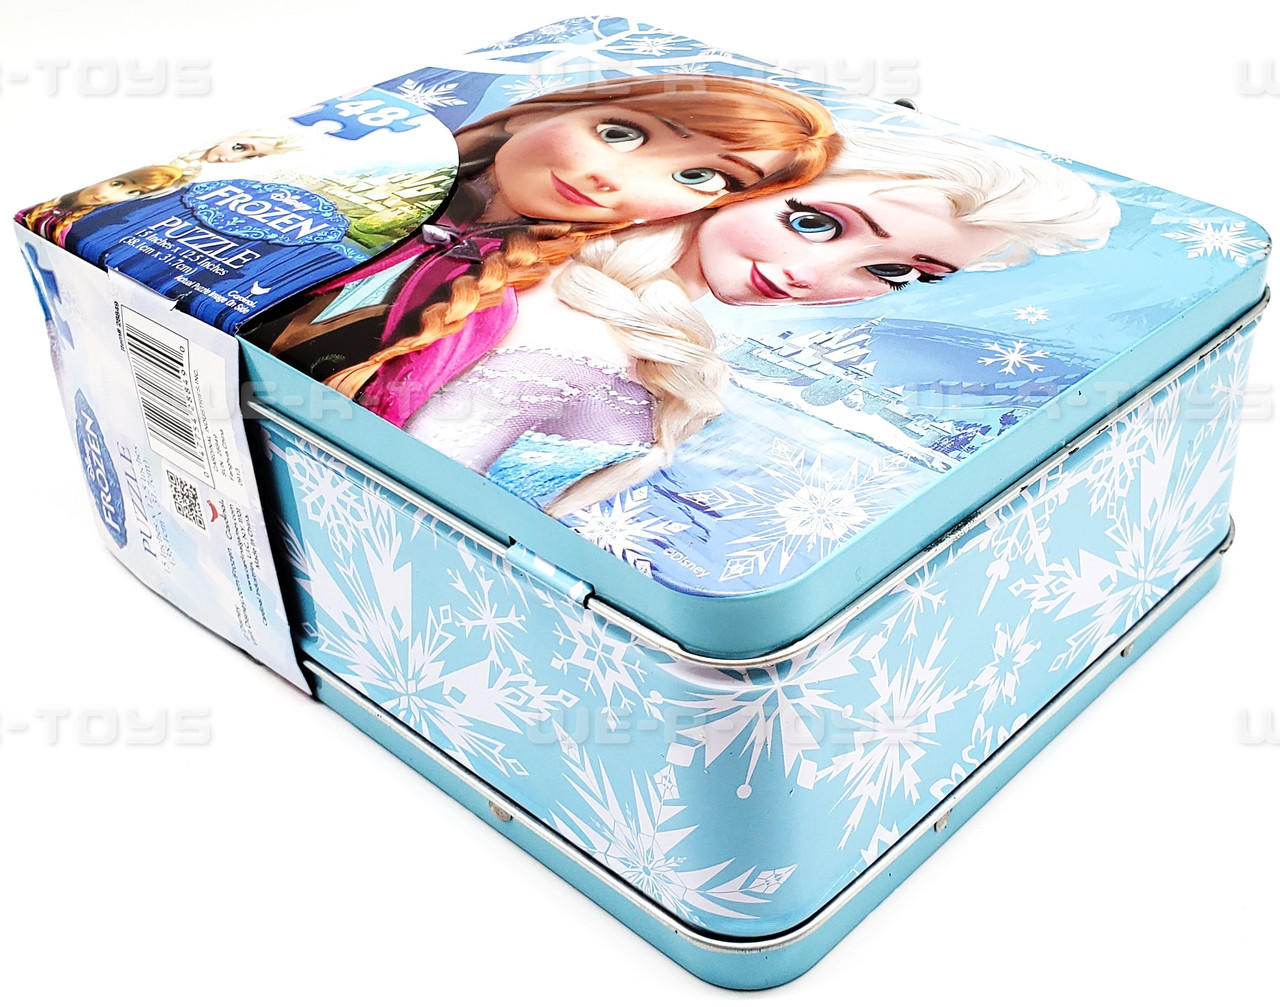 https://cdn11.bigcommerce.com/s-cy4lua1xoh/images/stencil/1280x1280/products/26918/232133/disney-frozen-puzzle-with-lunchbox-case-cardinal-games-28849-new__69406.1689713329.jpg?c=1?imbypass=on